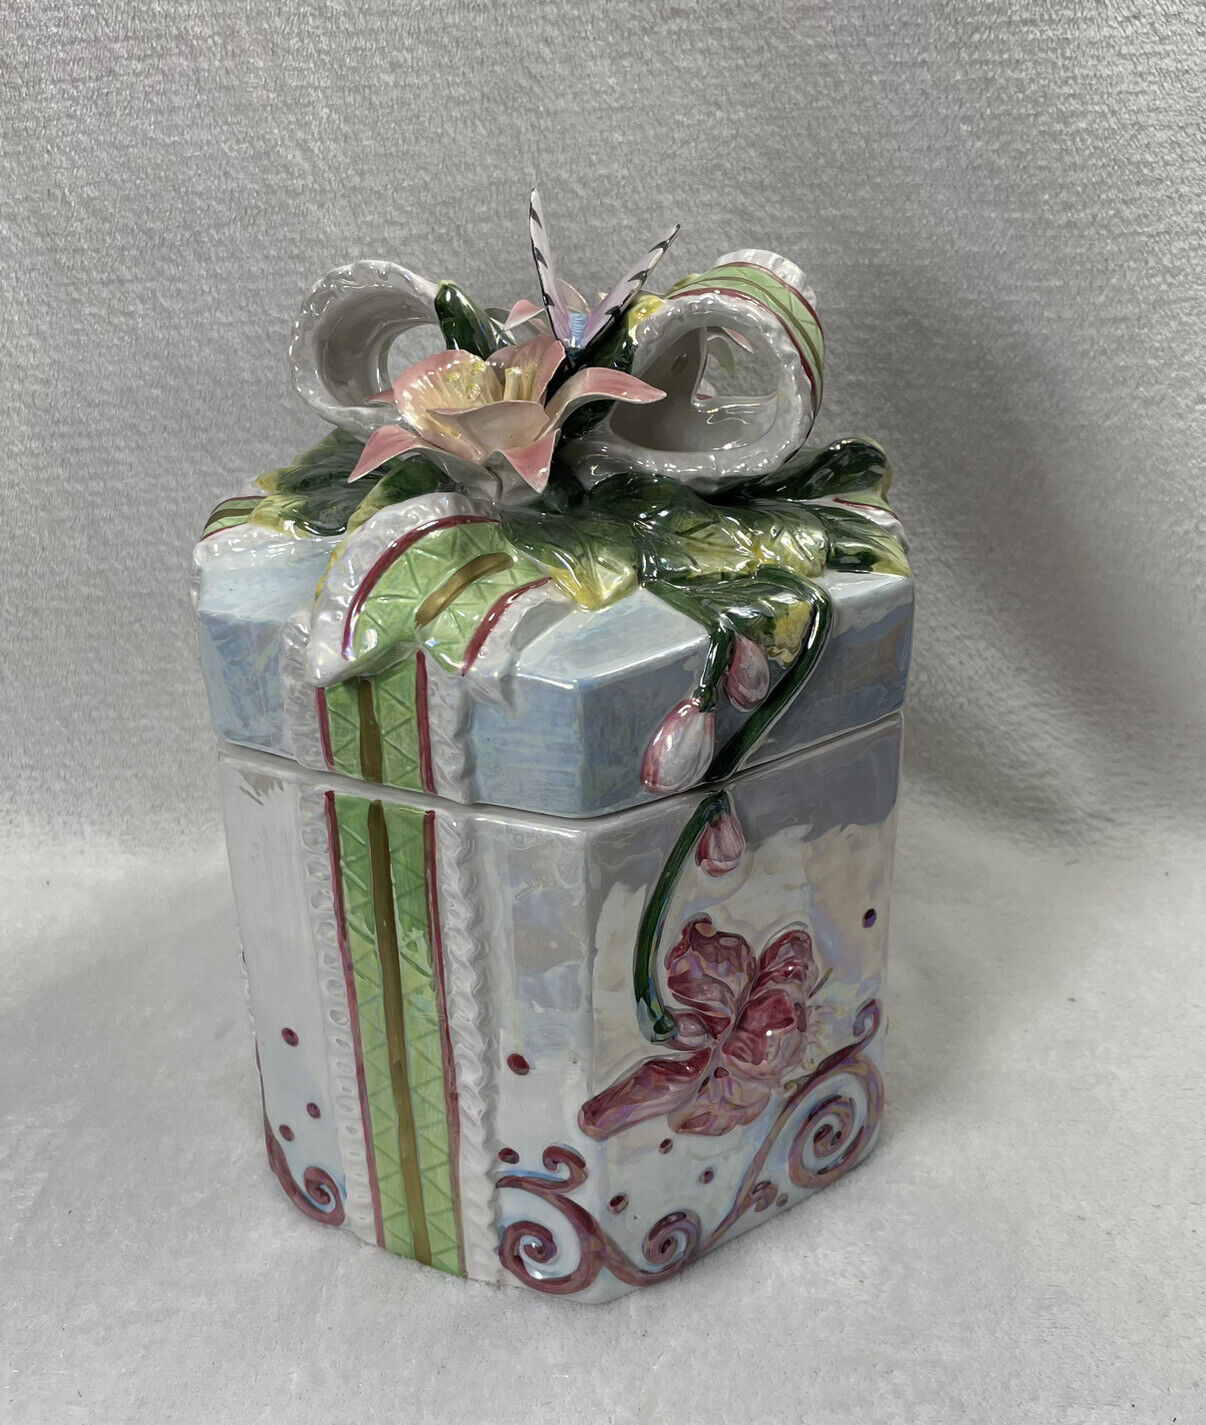 International Art Ceramic Floral Gift Wrapped Present with Ribbon Cookie Jar